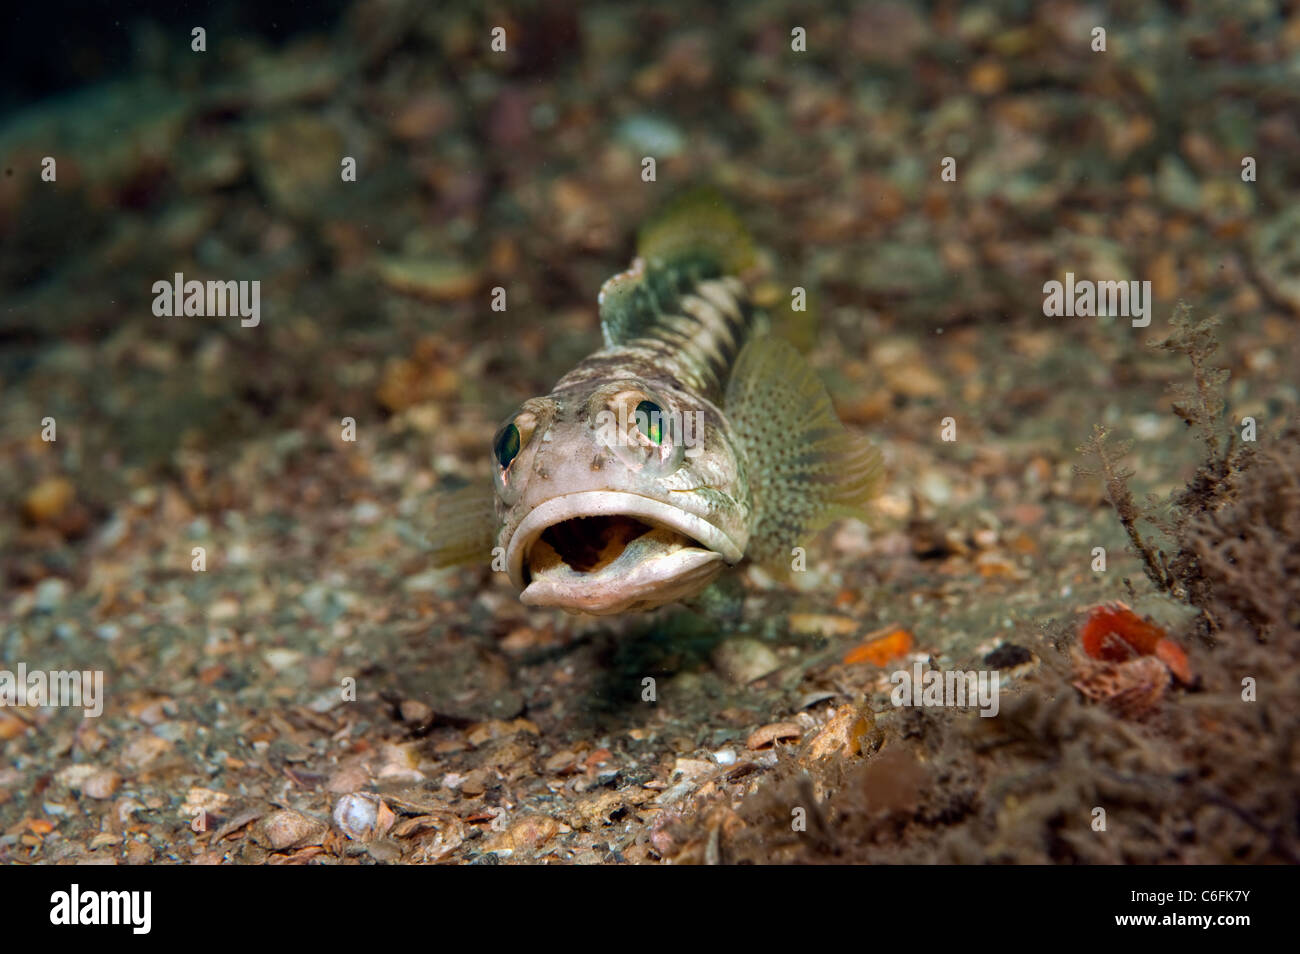 Male Banded Jawfish, Opistognathus macrognathus, digs and prepares his burrow prior to courting and mating. Stock Photo